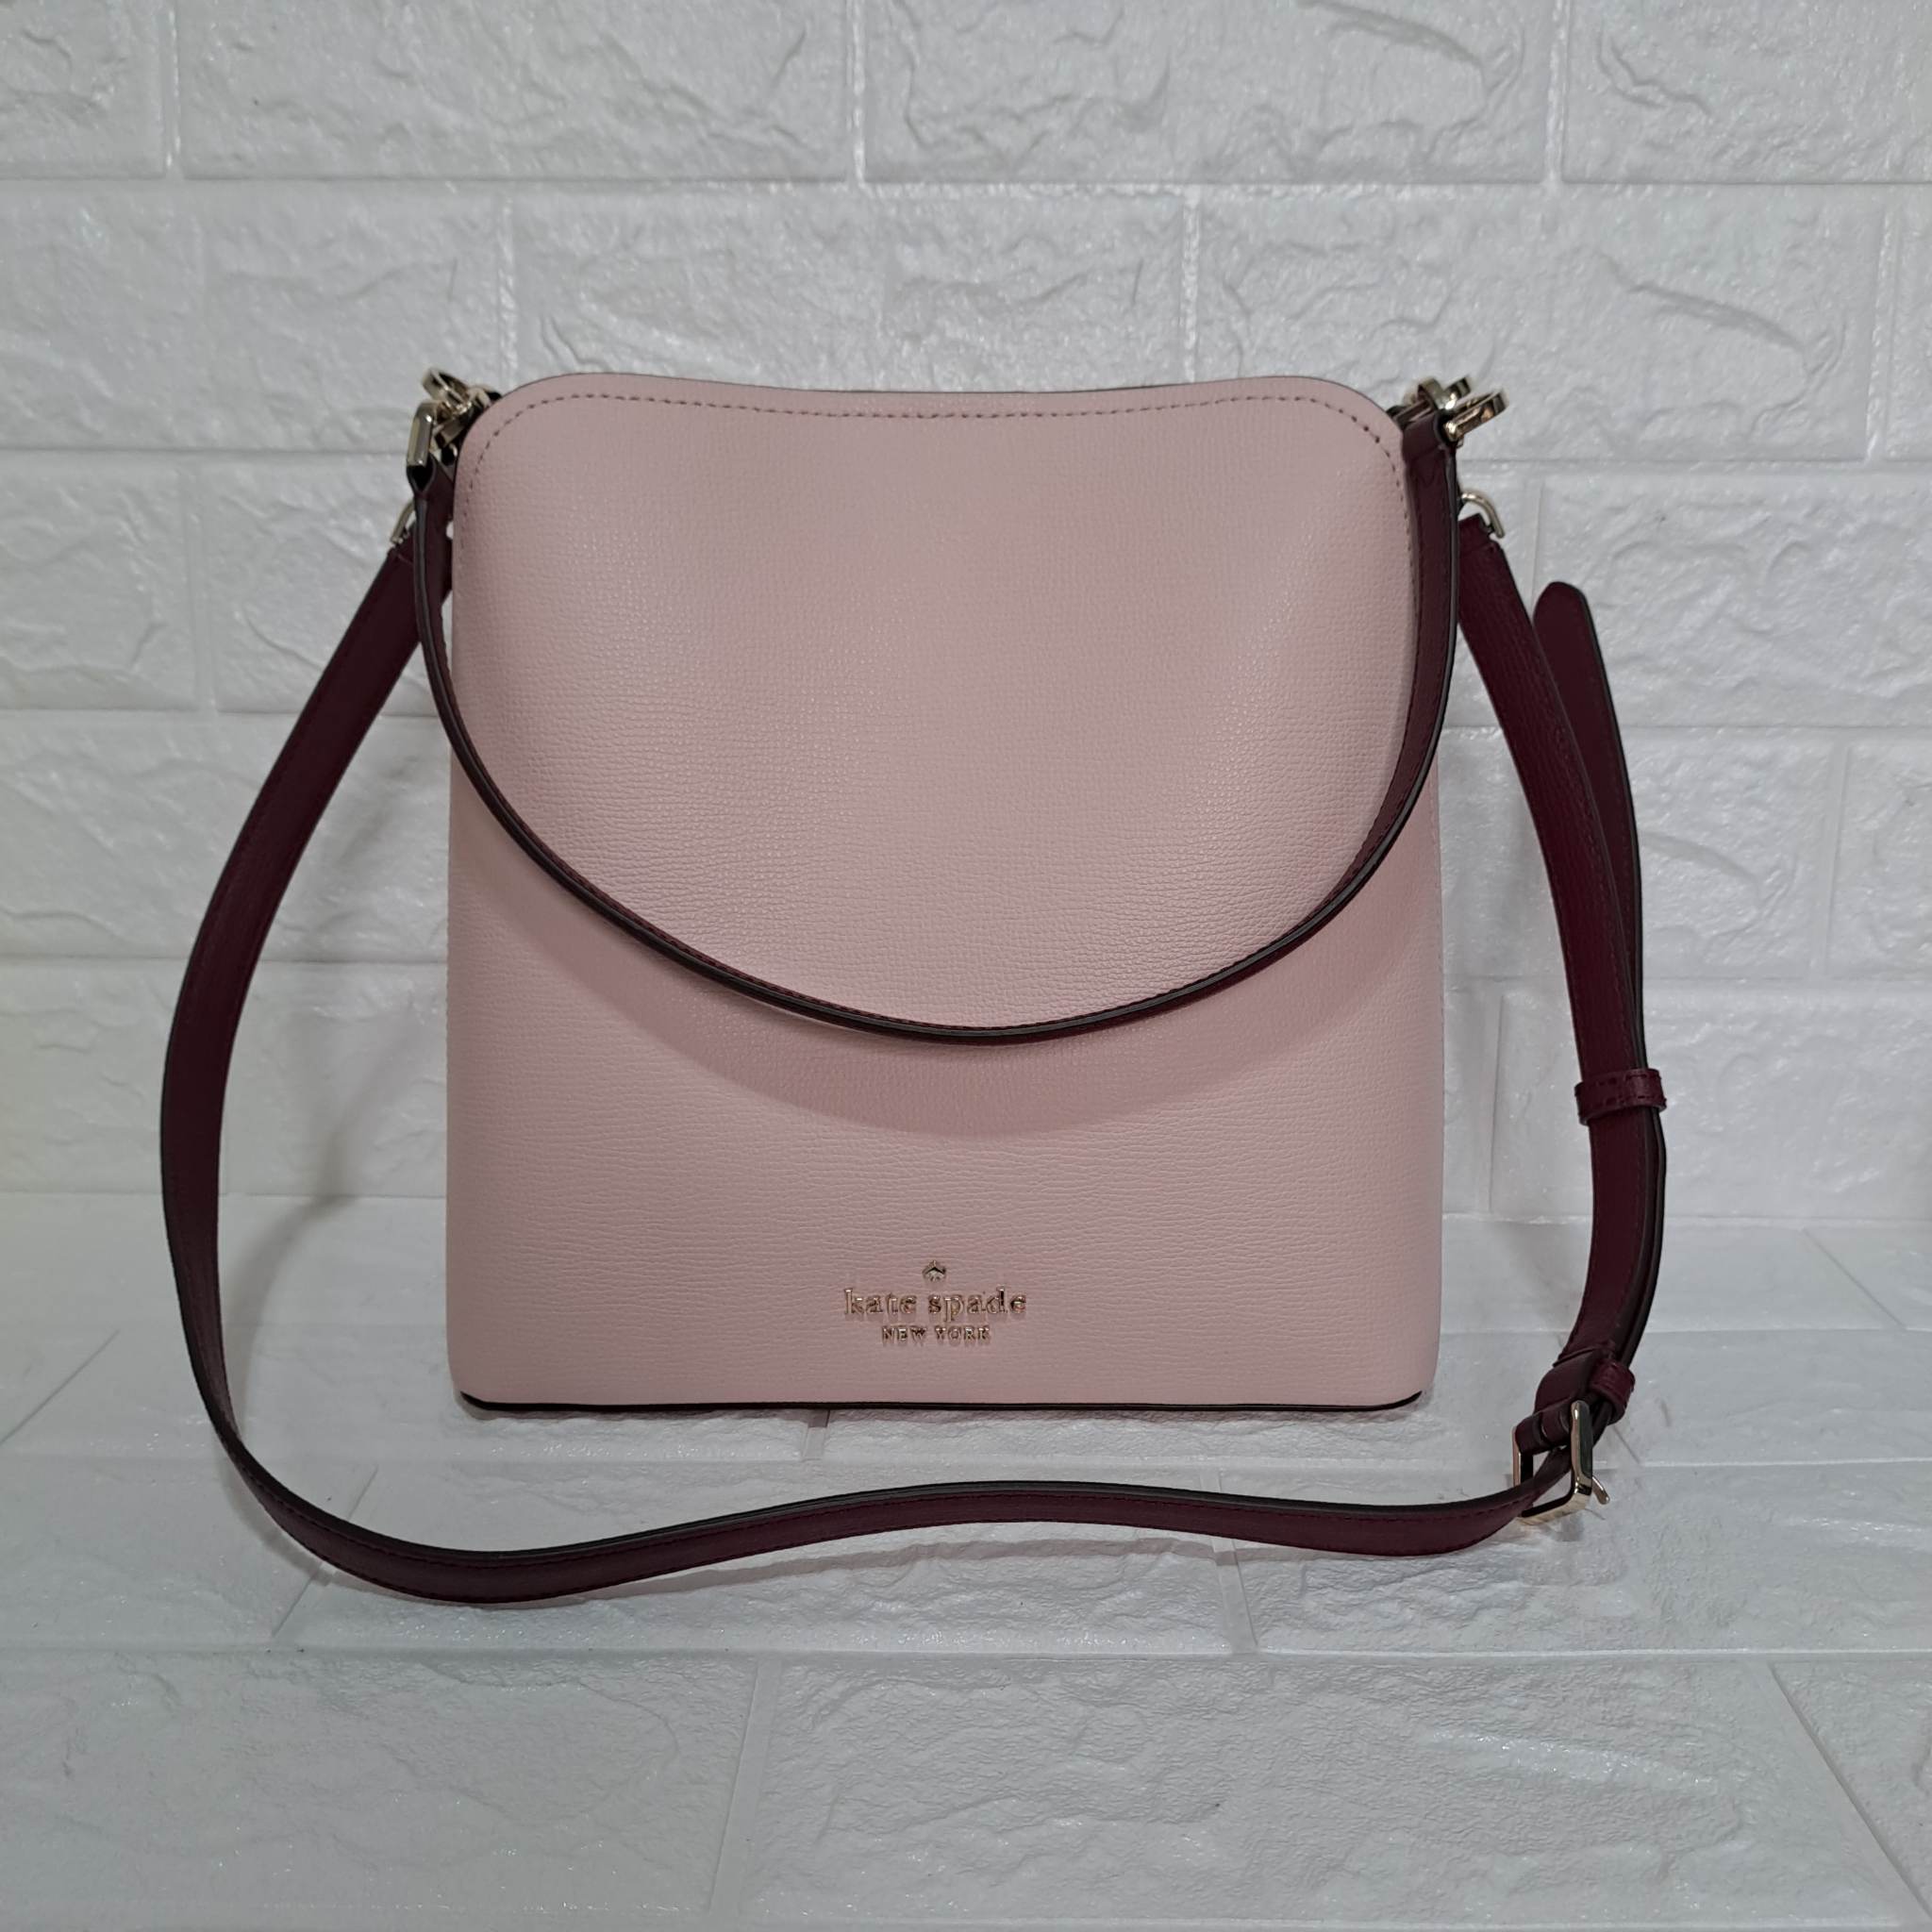 kate spade, Bags, Kate Spade Light Pink Purse Authentic